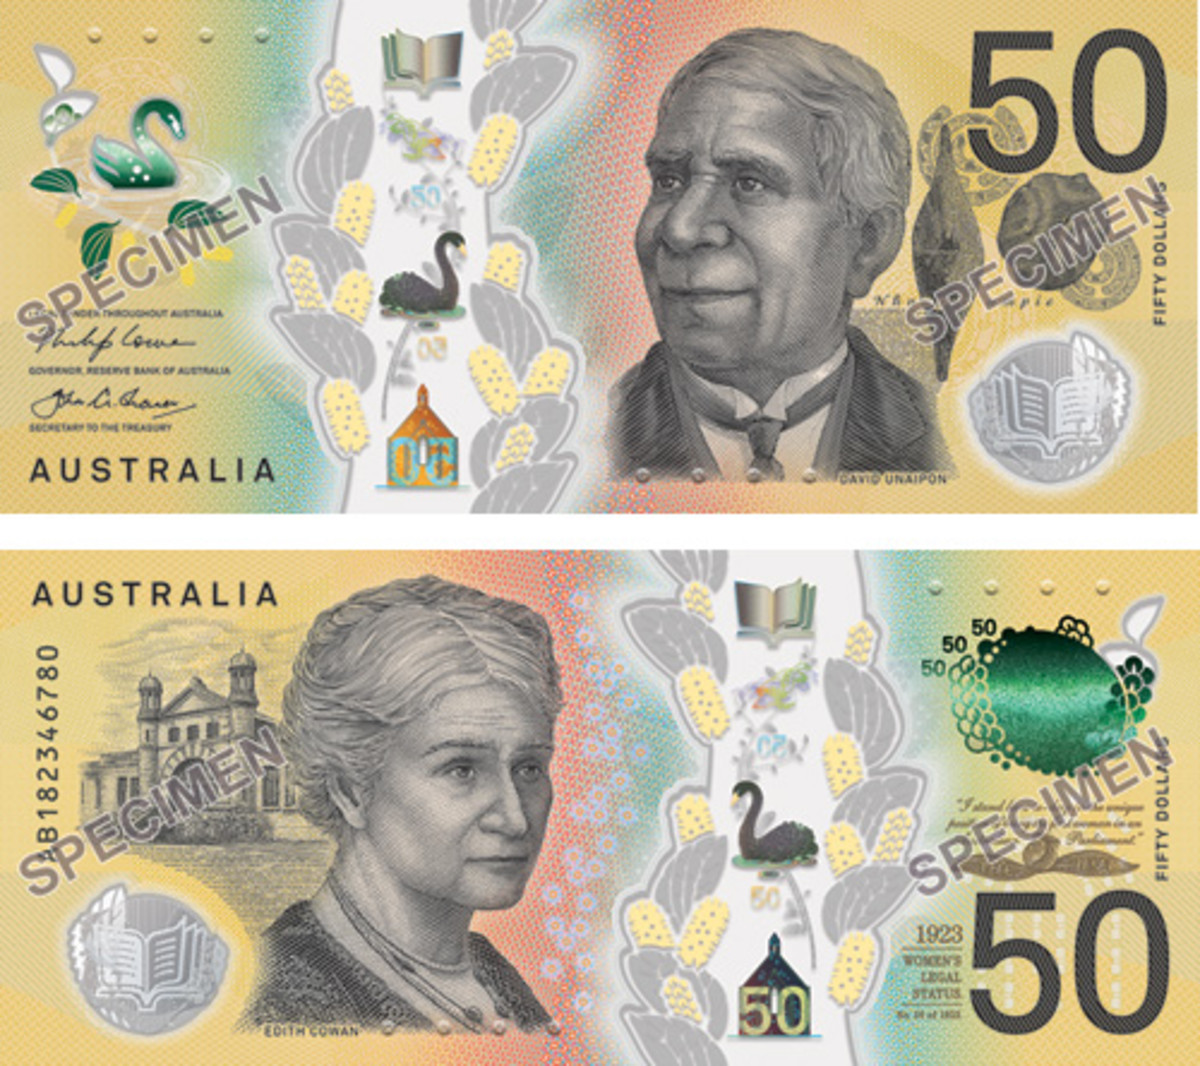  Face and back of Australia’s new $50 bank note that was to be placed into circulation on Oct. 18. (Images courtesy Reserve Bank of Australia)